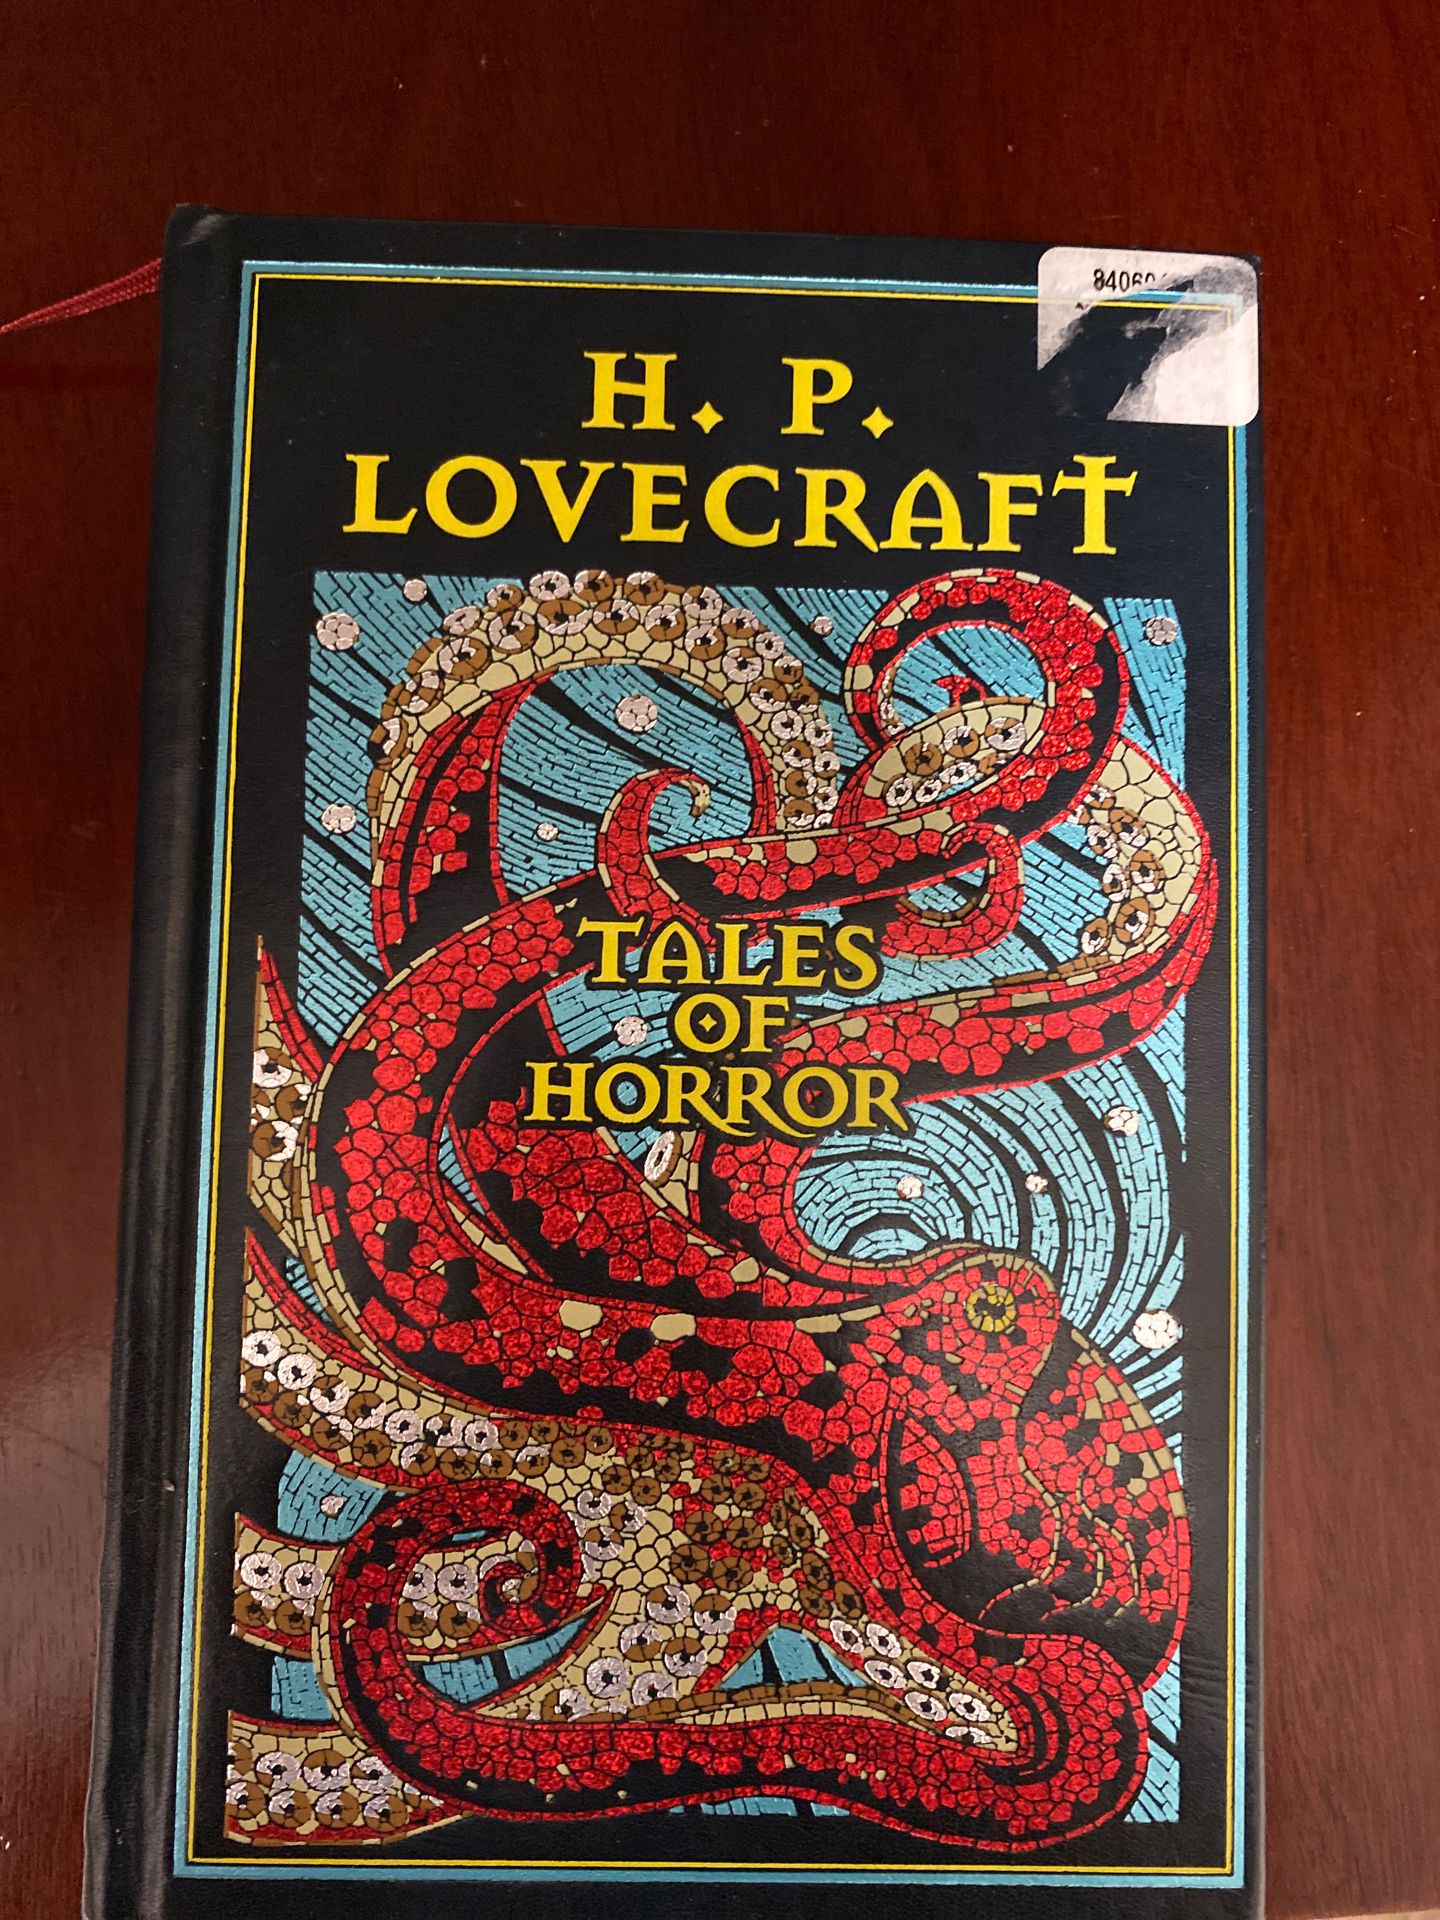 H.P love craft tales of horror